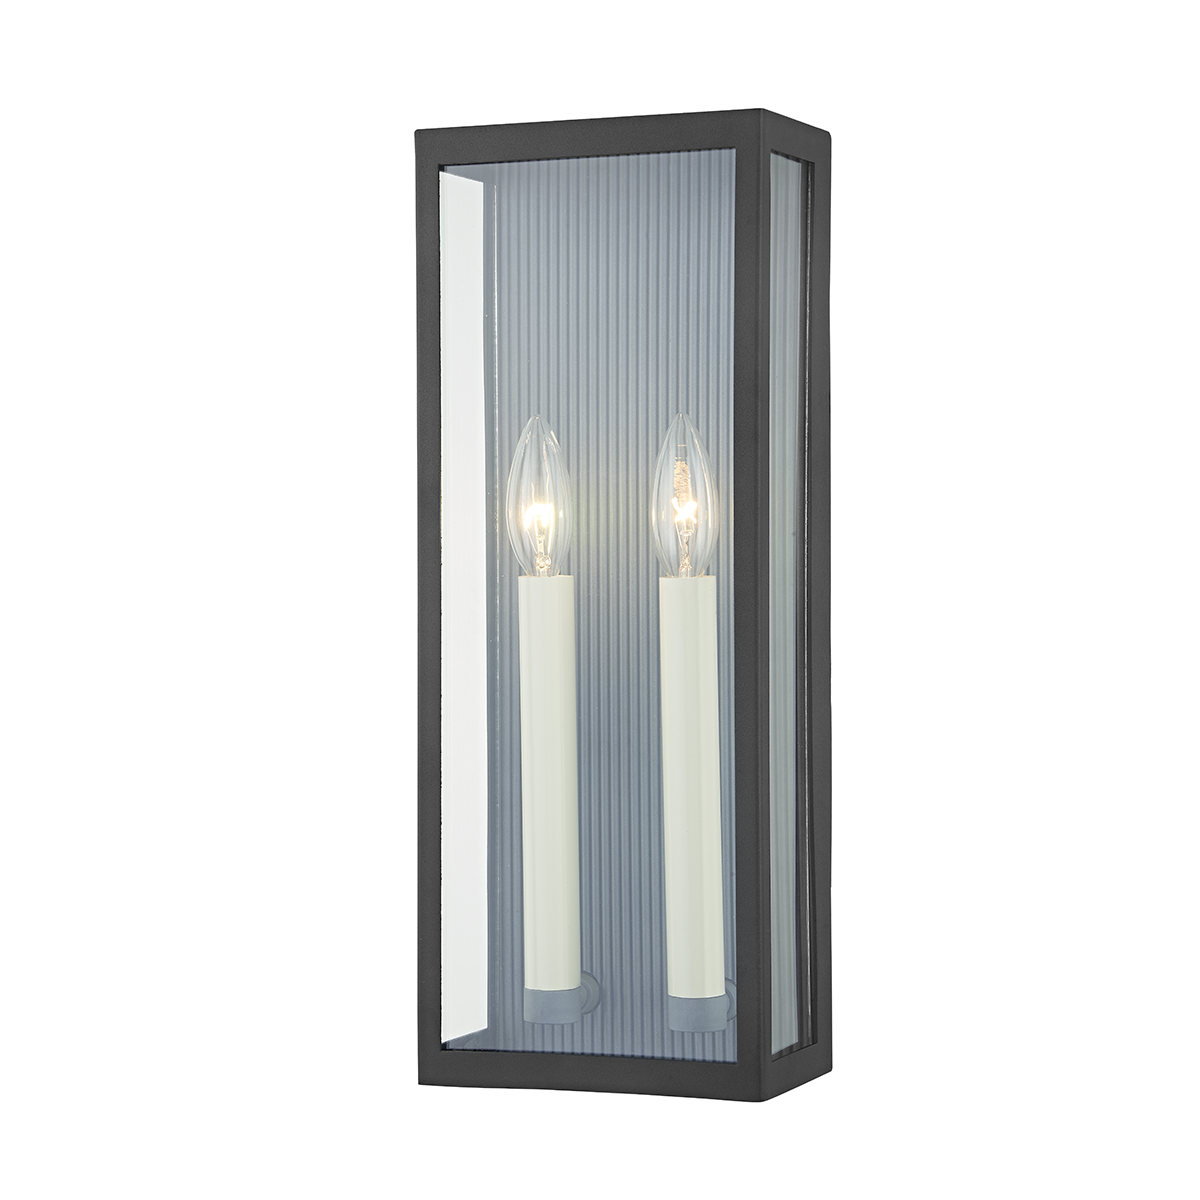 Troy VAIL 2 LIGHT EXTERIOR WALL SCONCE B1032 Outdoor l Wall Troy Lighting TEXTURE BLACK/WEATHERED ZINC  